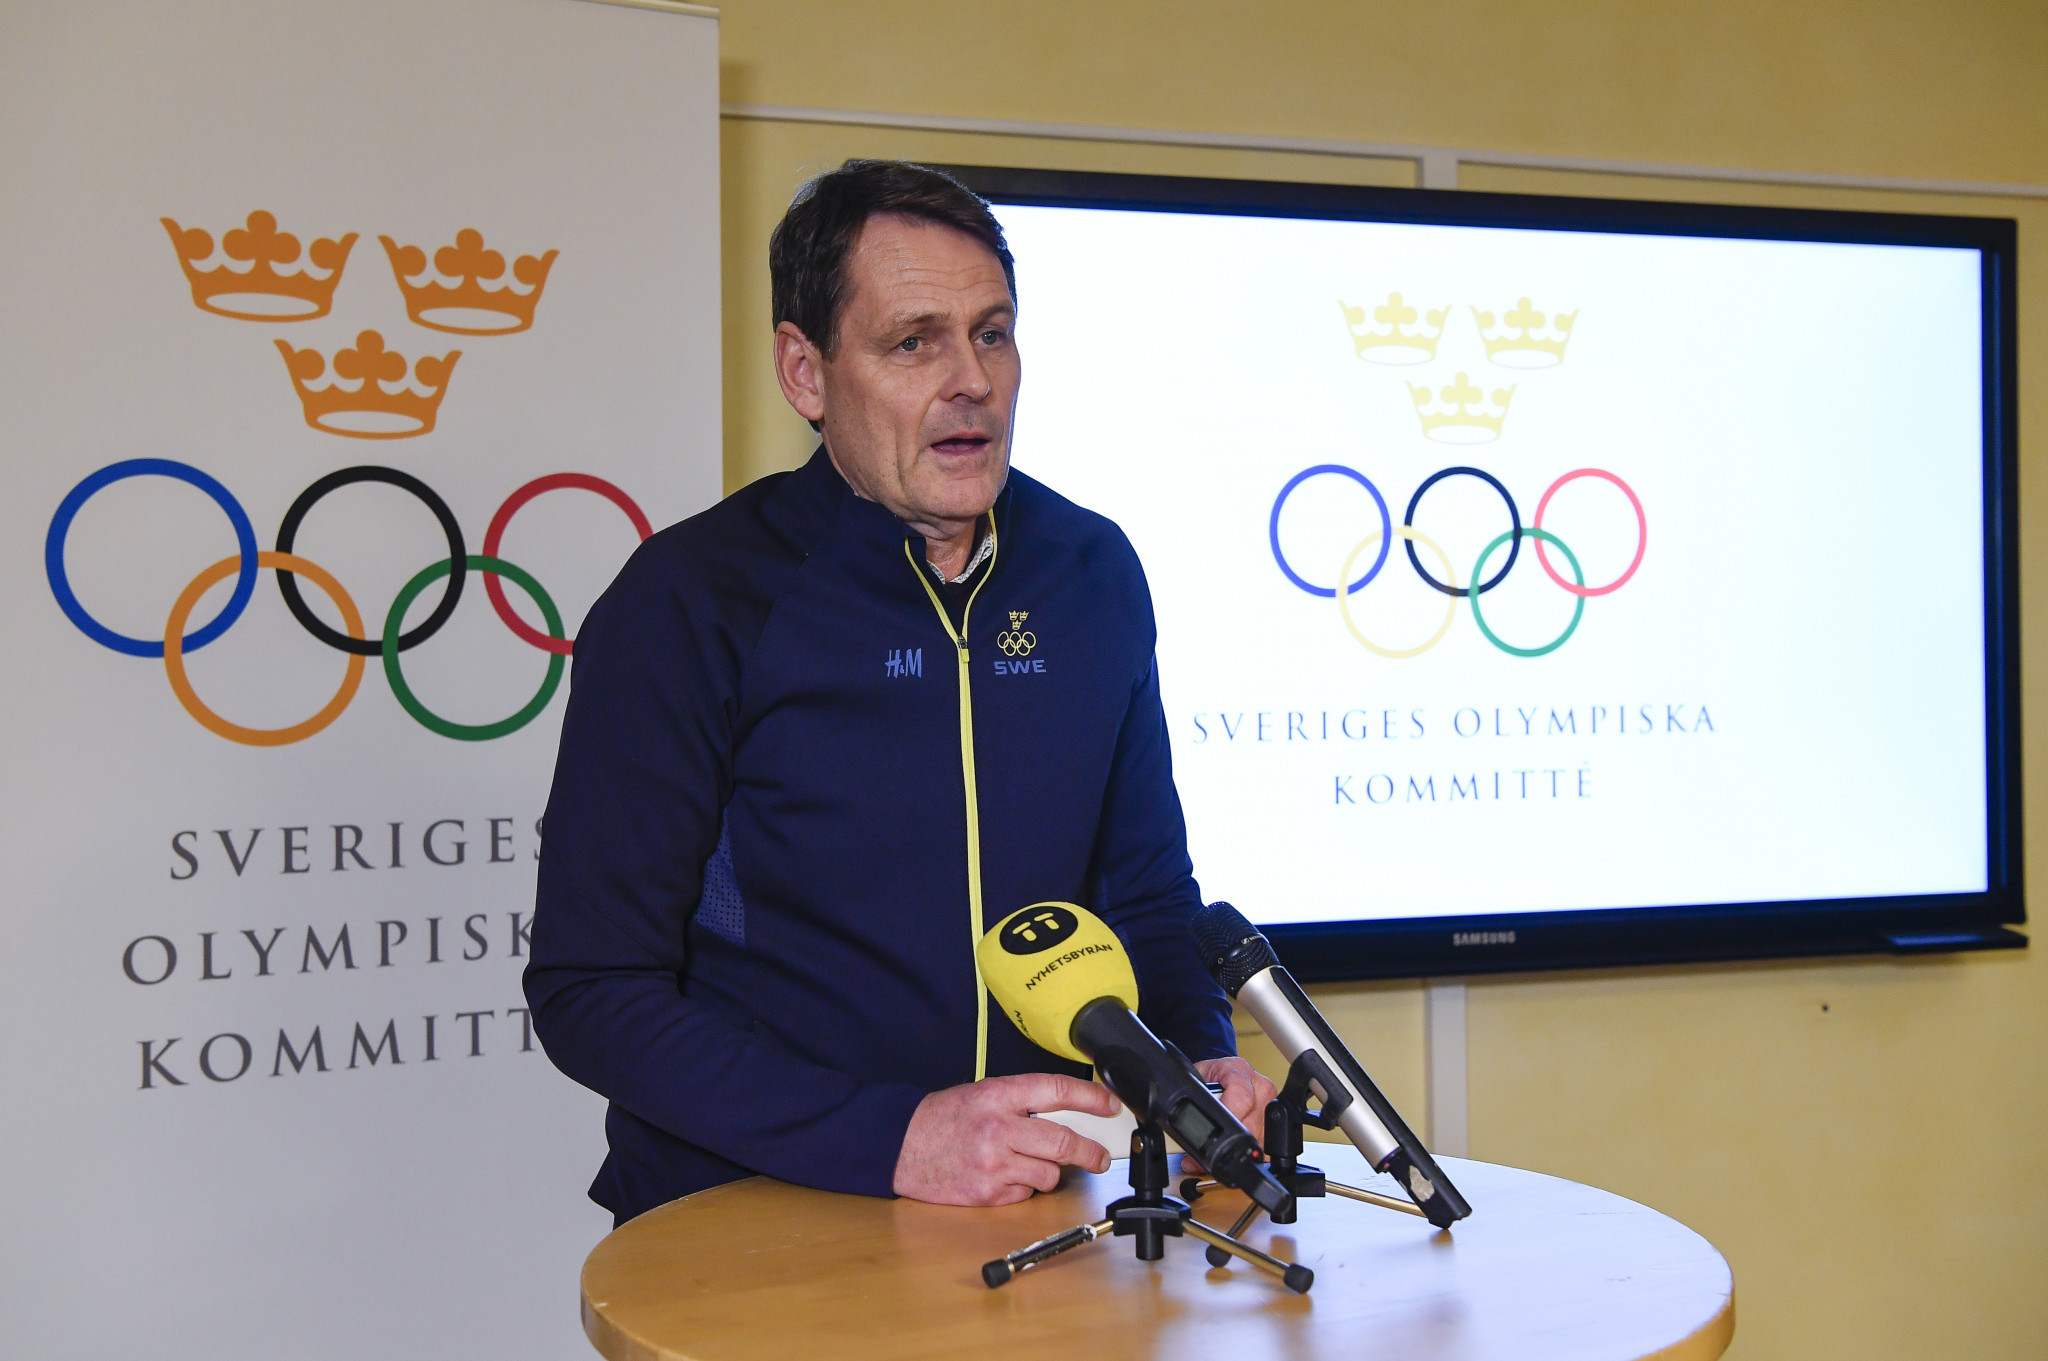 SOK chief executive Peter Reinebo hopes the new sports showcased will help strengthen the Olympic Movement ©Getty Images